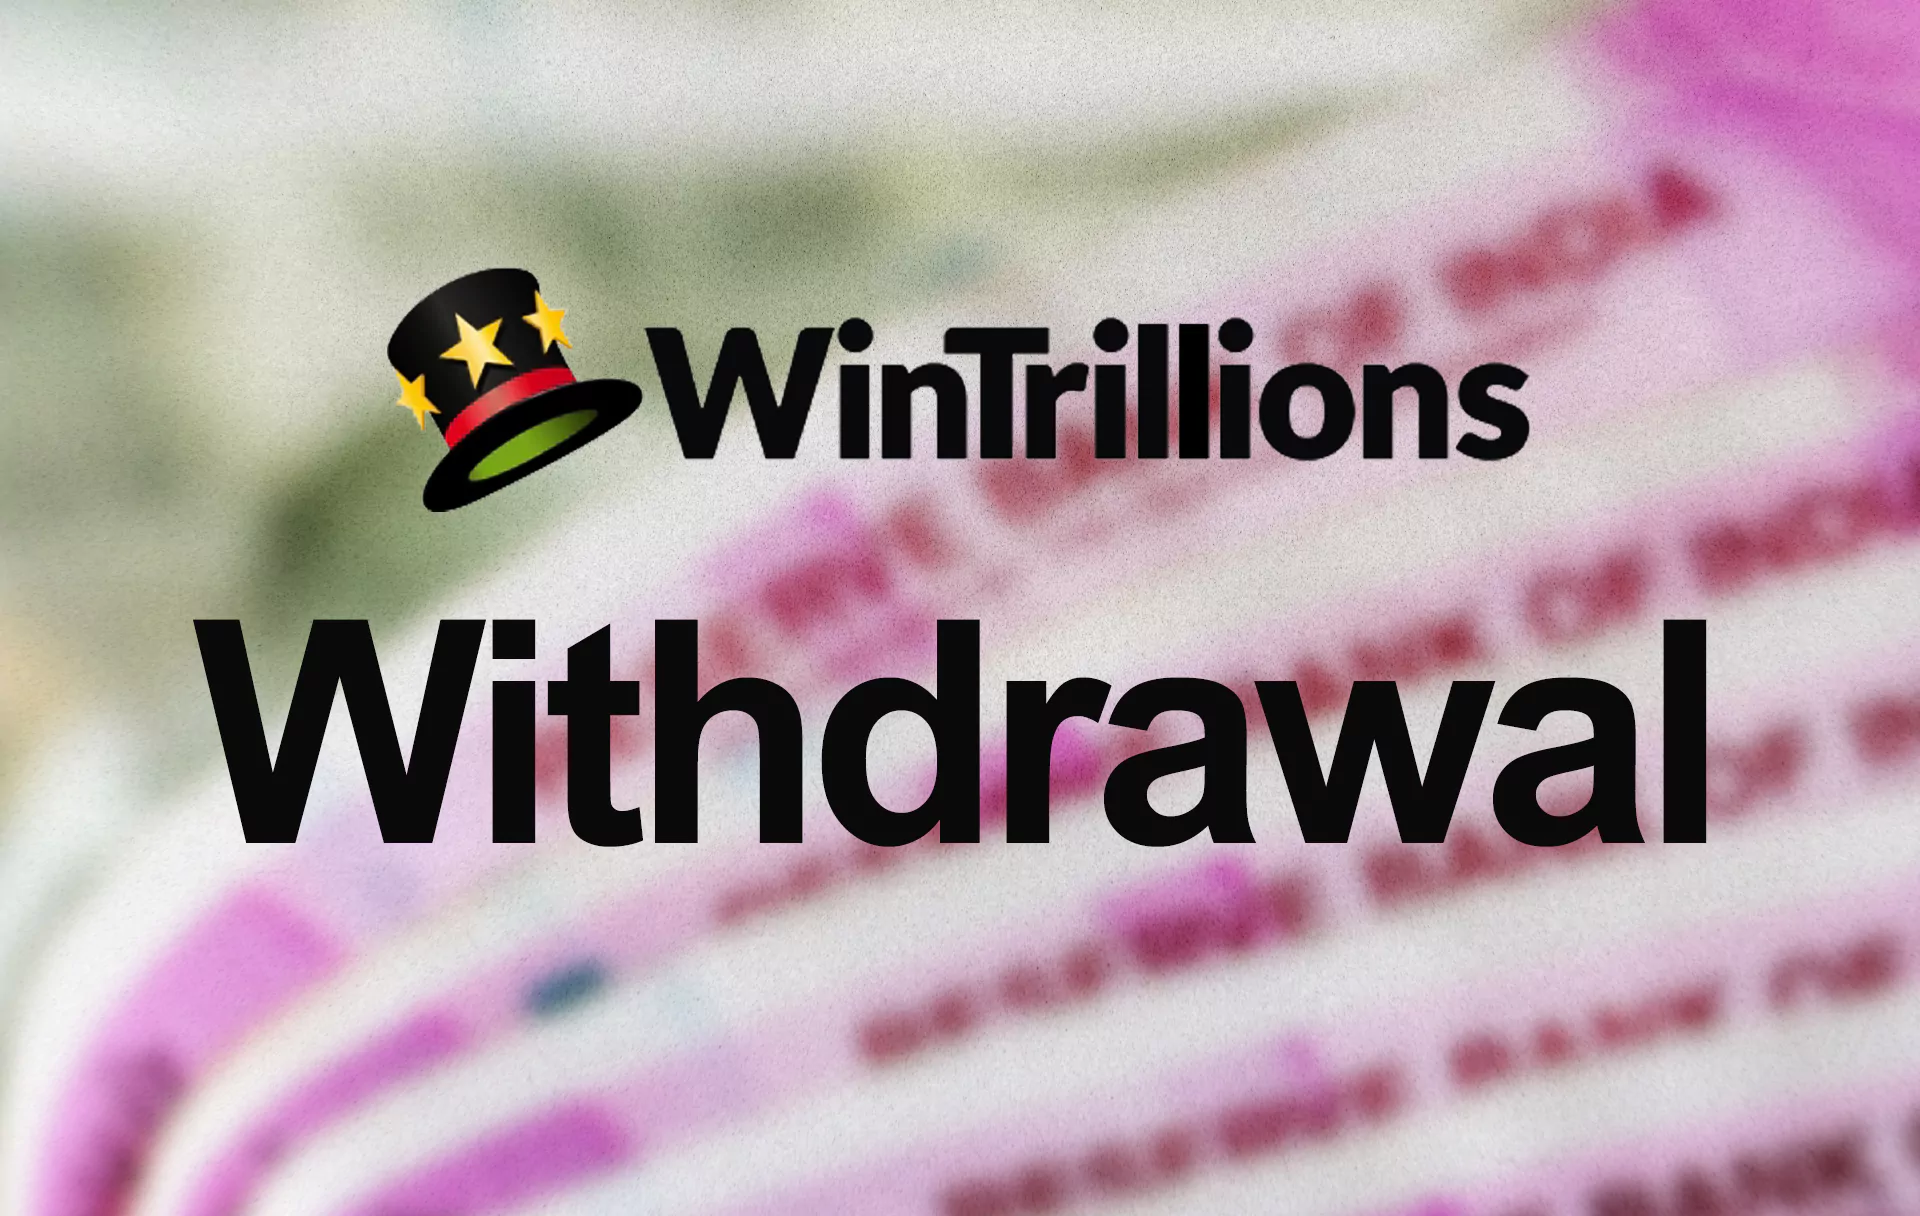 From the Wintrillions site, you can withdraw money to a bank card or e-wallet.